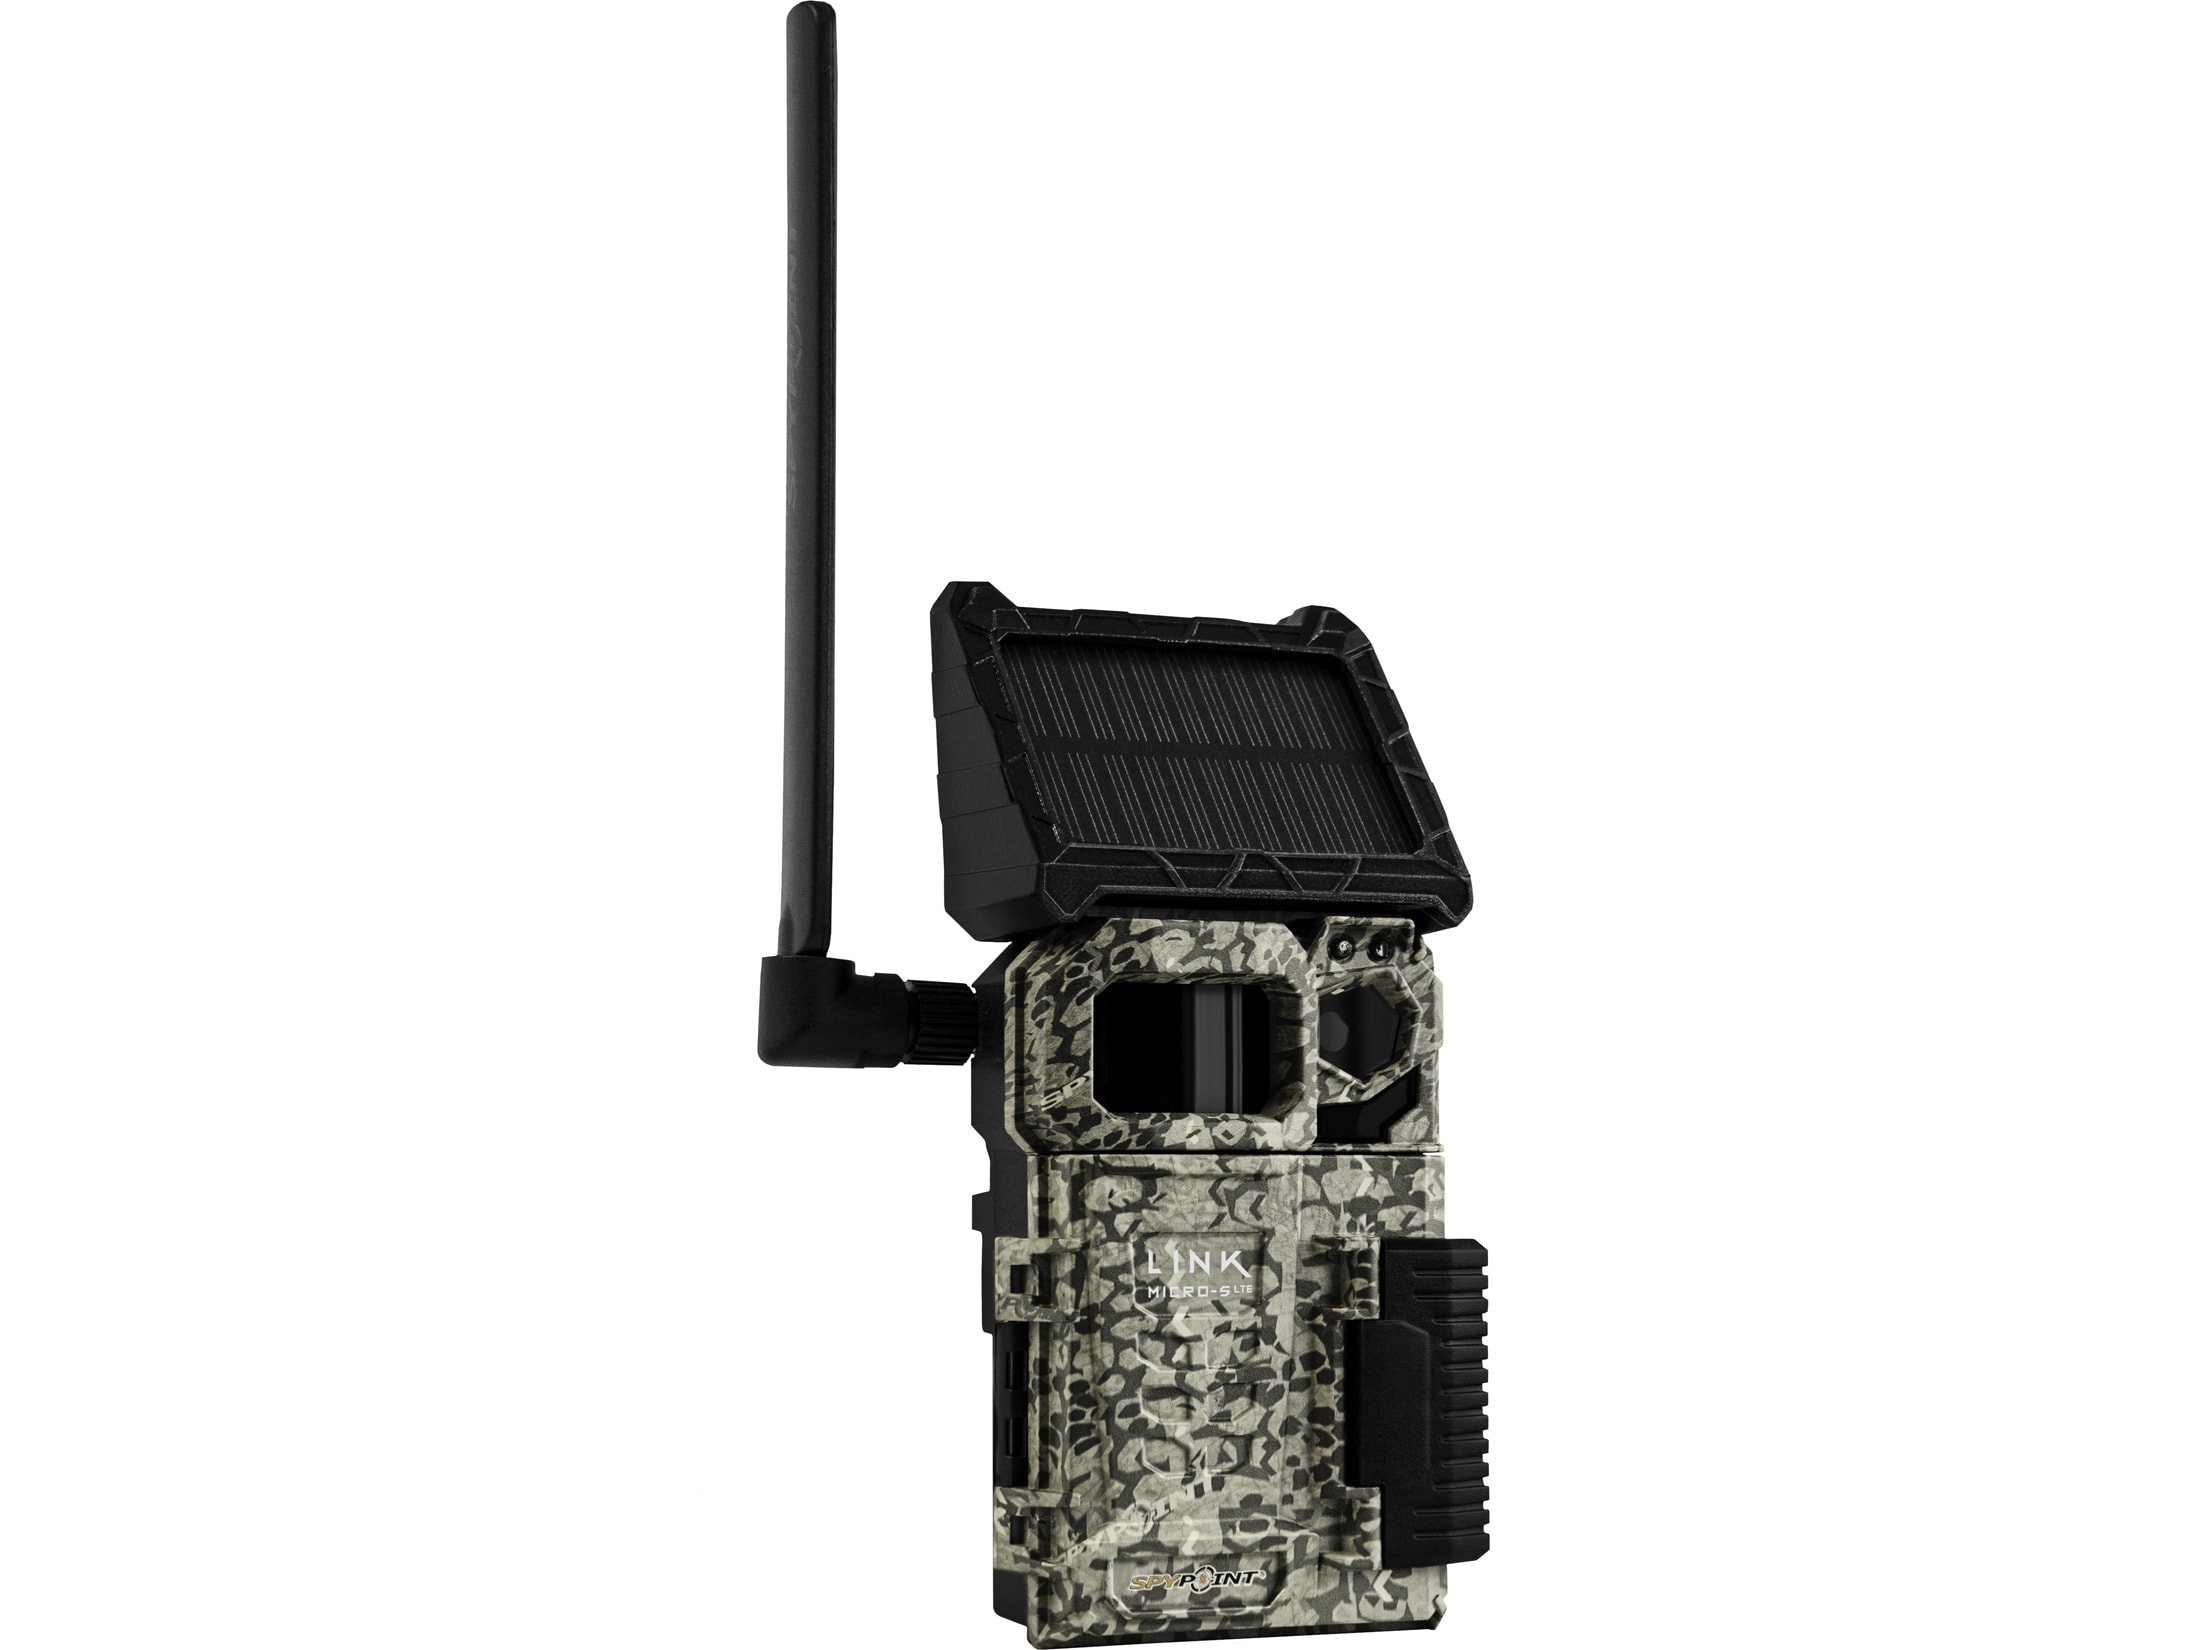 4G Antenna For Spypoint Link-Micro-LTE AT&T Cellular Low Glow IR Trail Camera 